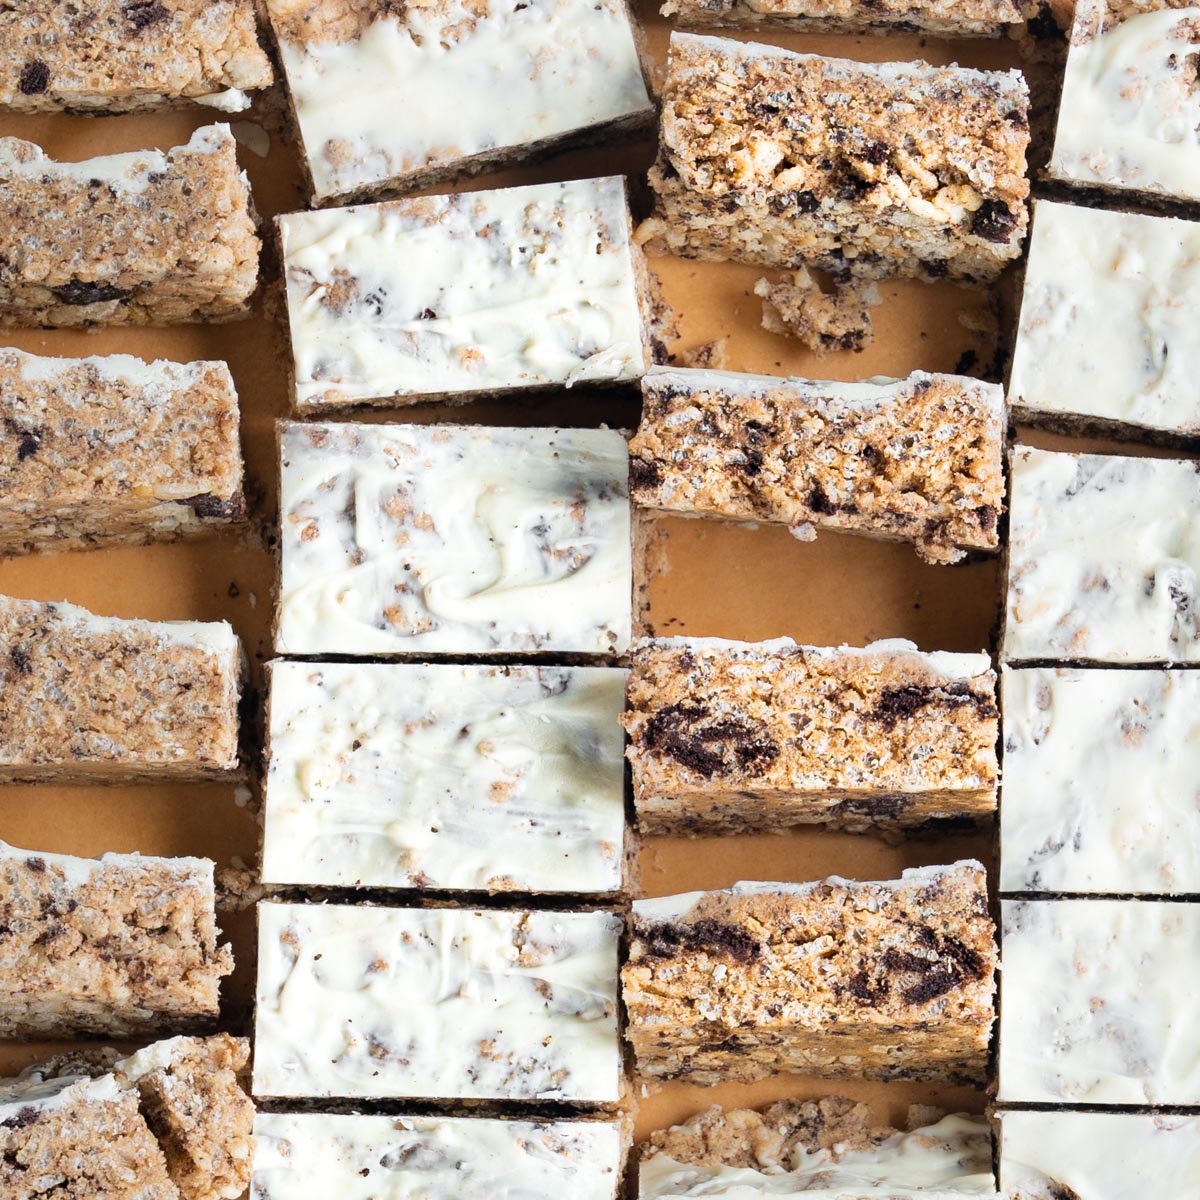 An array of cookies and cream protein bars with a white chocolate frosting